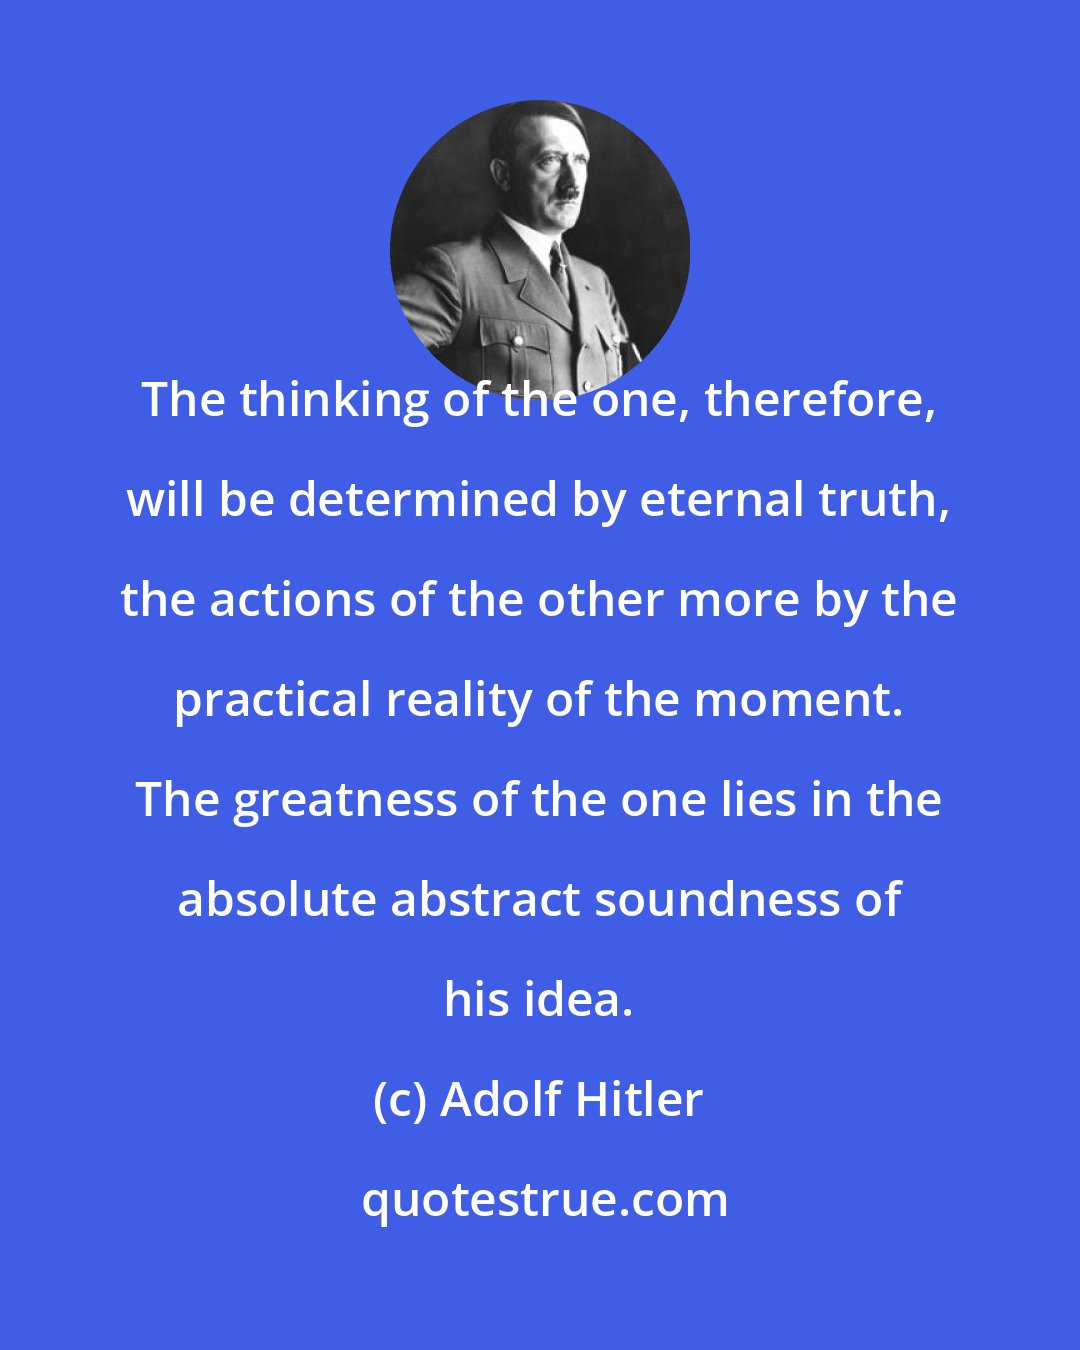 Adolf Hitler: The thinking of the one, therefore, will be determined by eternal truth, the actions of the other more by the practical reality of the moment. The greatness of the one lies in the absolute abstract soundness of his idea.